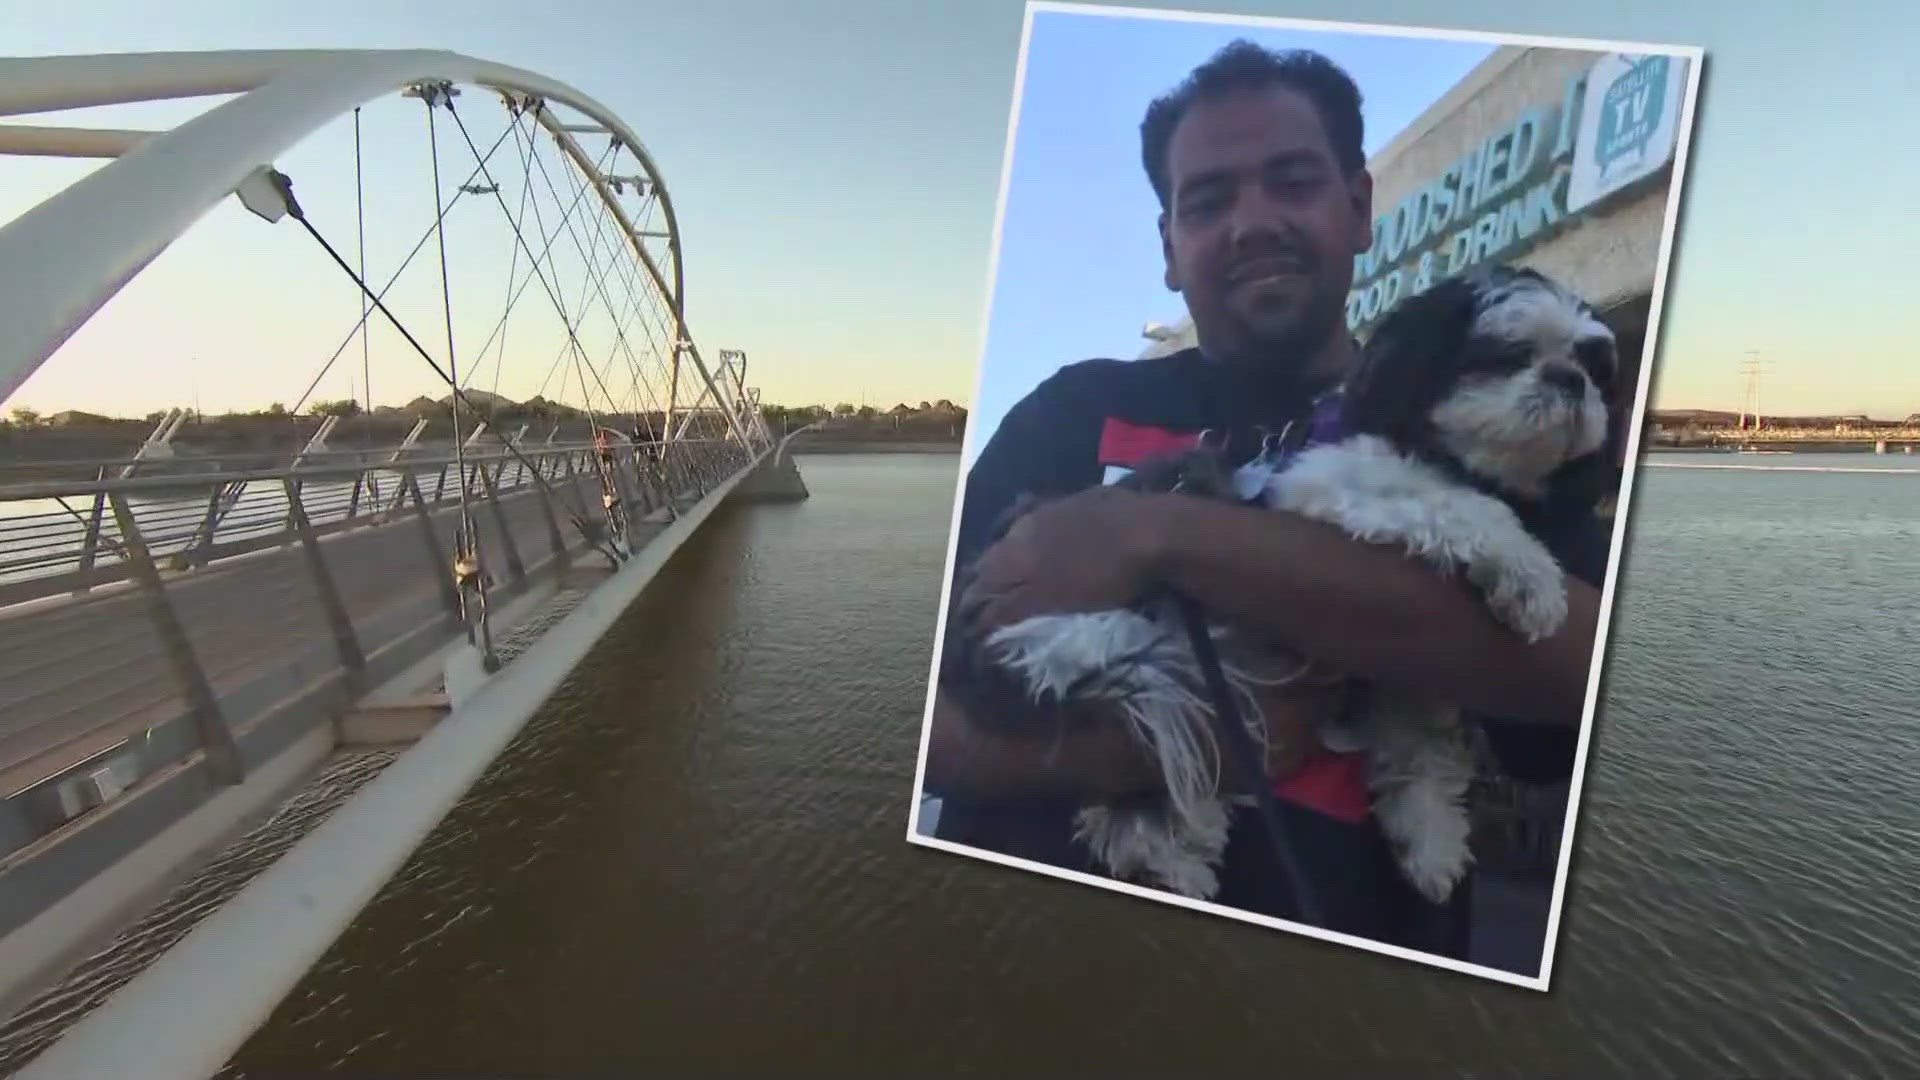 The wrongful death lawsuit filed by the family of Sean Bickings accuses Tempe of not properly training public safety employees to conduct rescues in Tempe Town Lake.